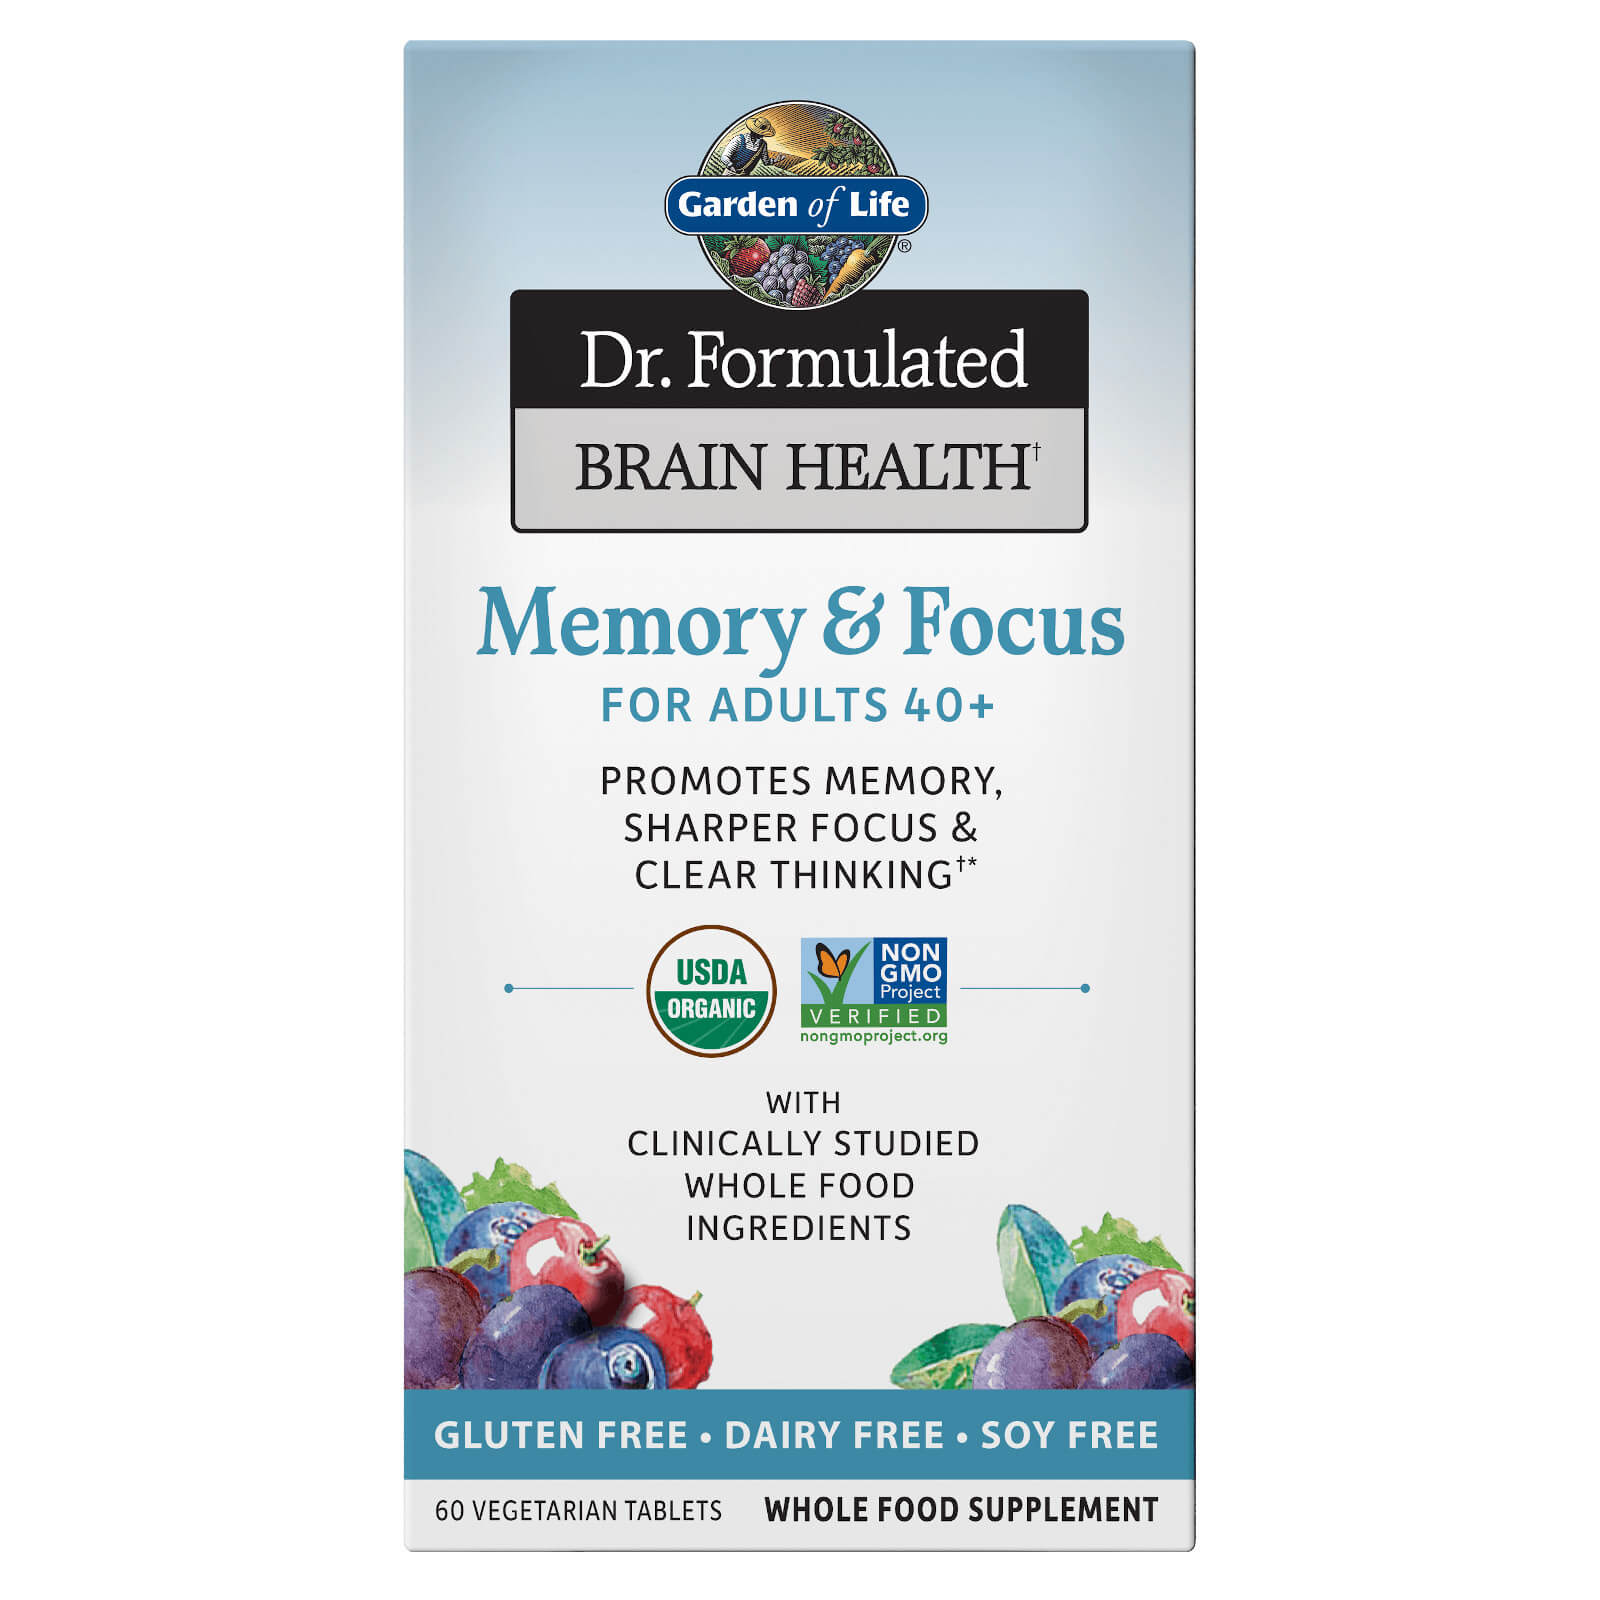 Garden of Life Dr. Formulated Brain Health Organic Memory/Focus Adults 40 60ct Tablets